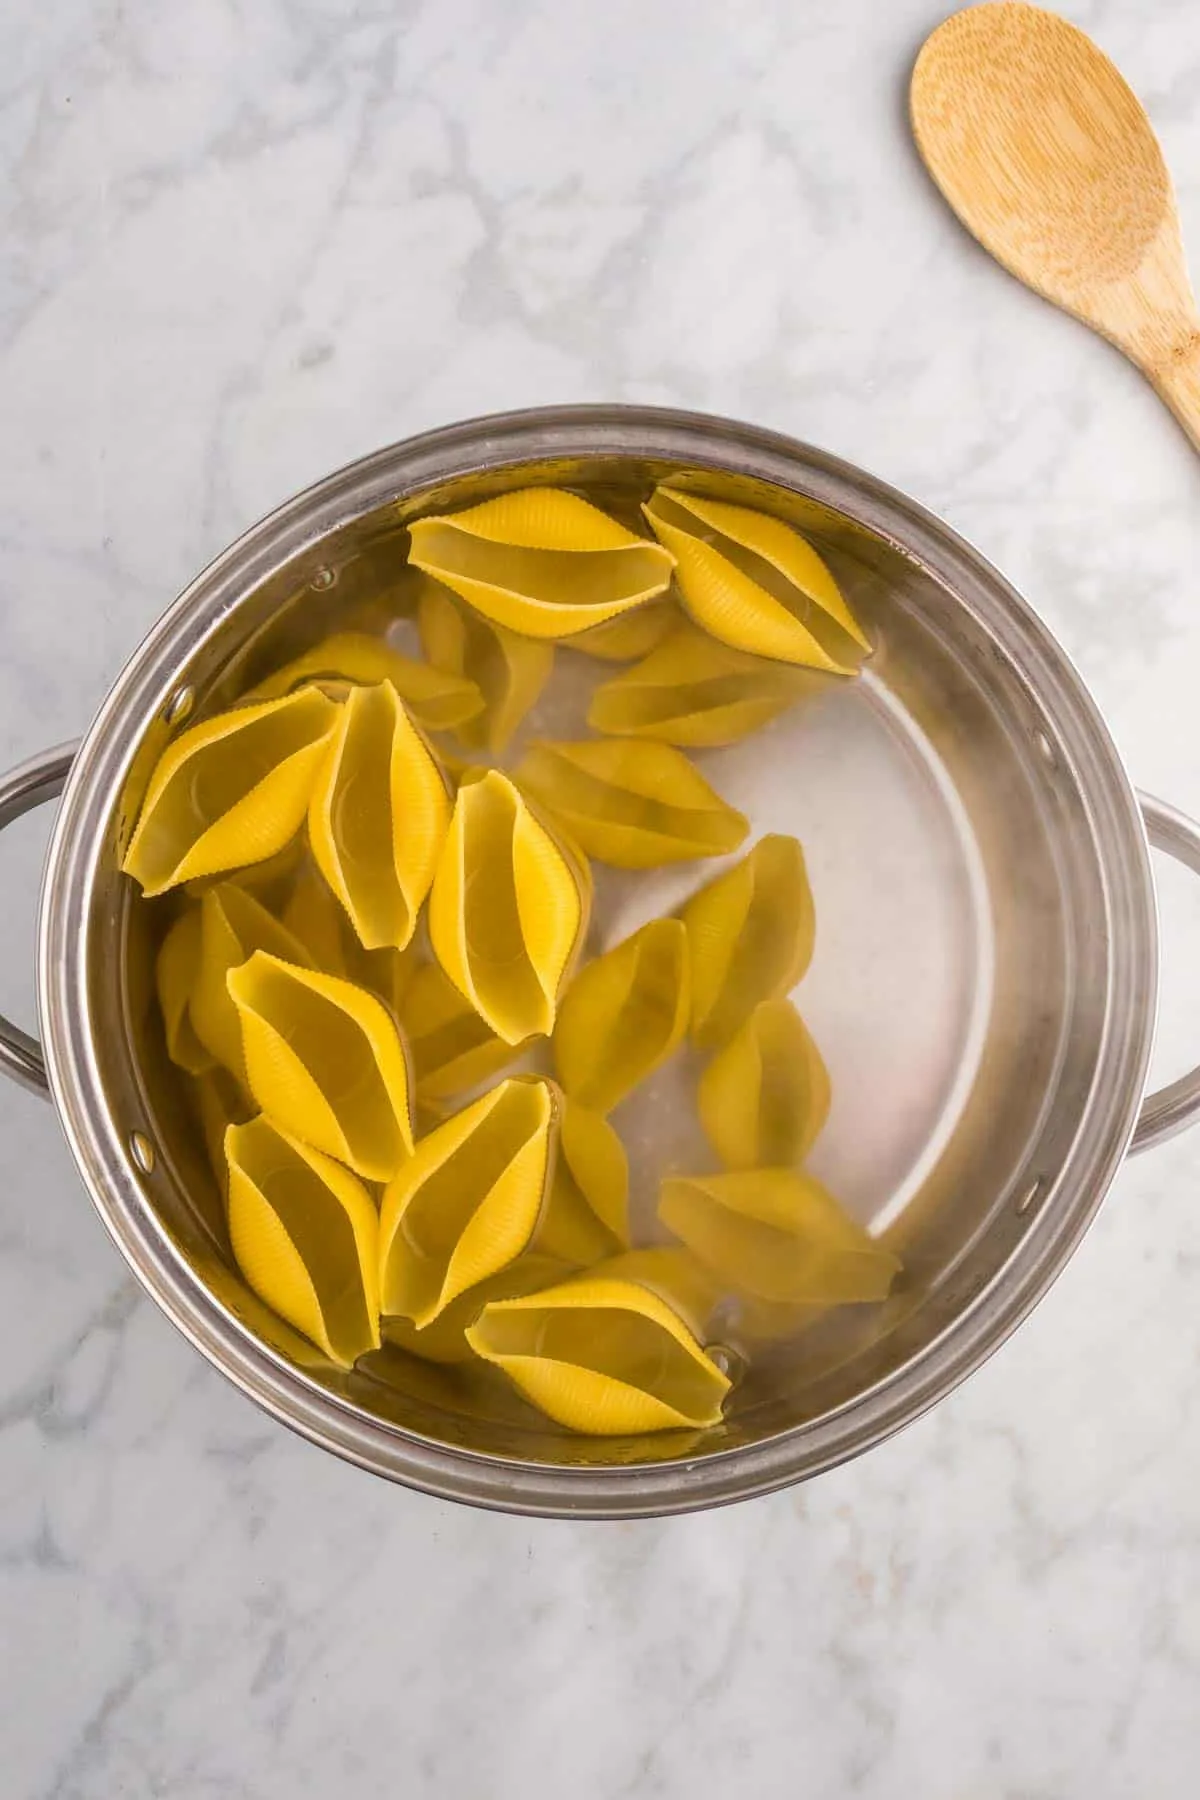 jumbo pasta shells cooking in a pot of water